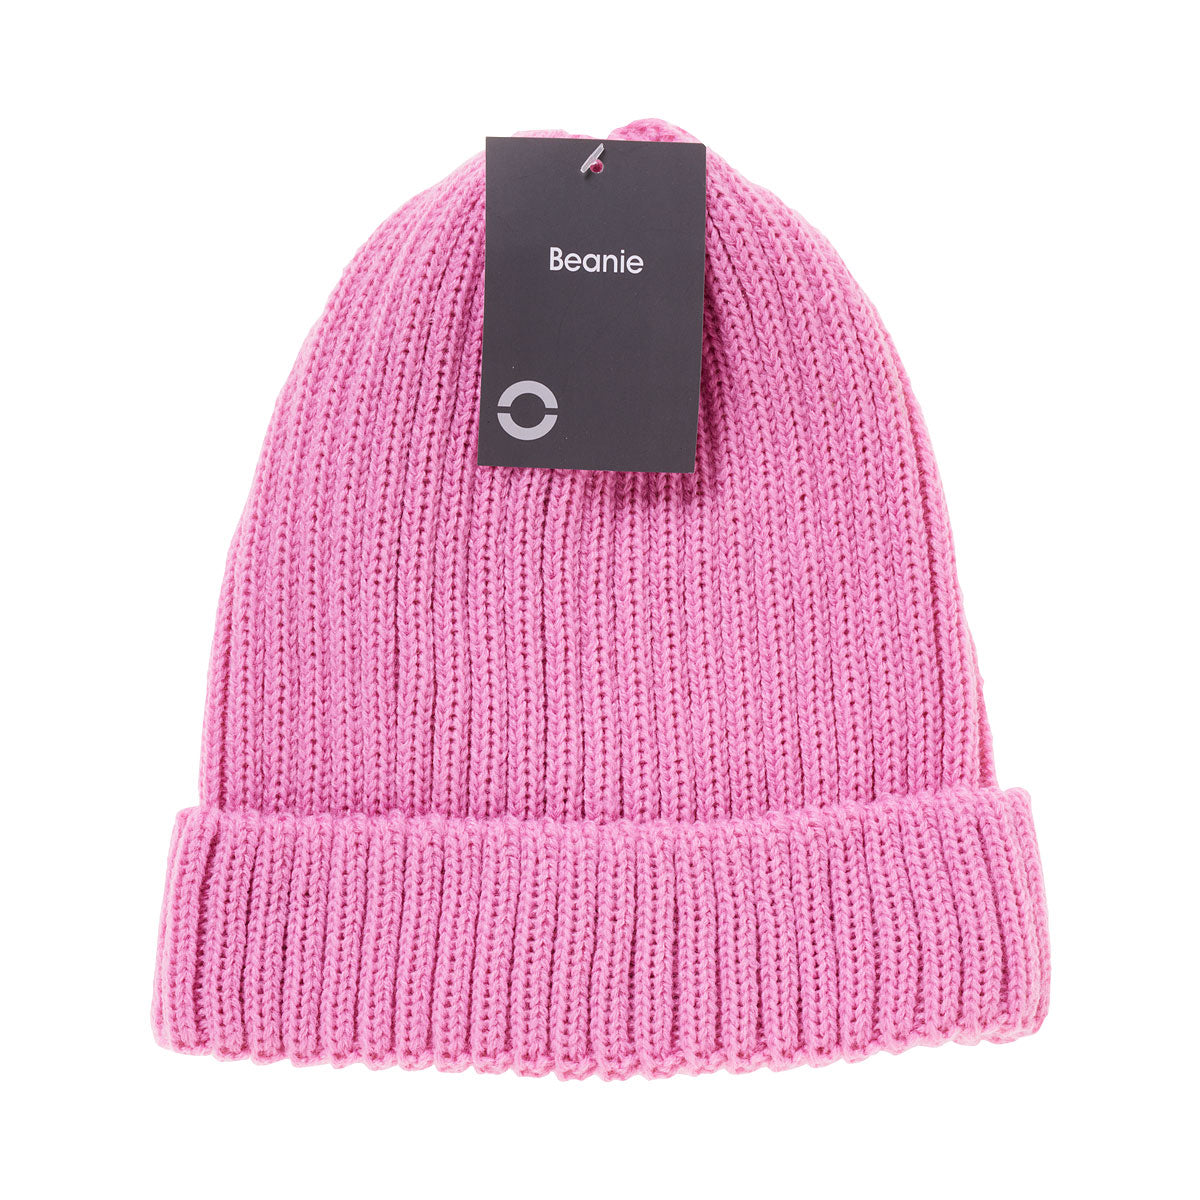 Ribbed Beanie Turquoise/Pink/Striped Pink